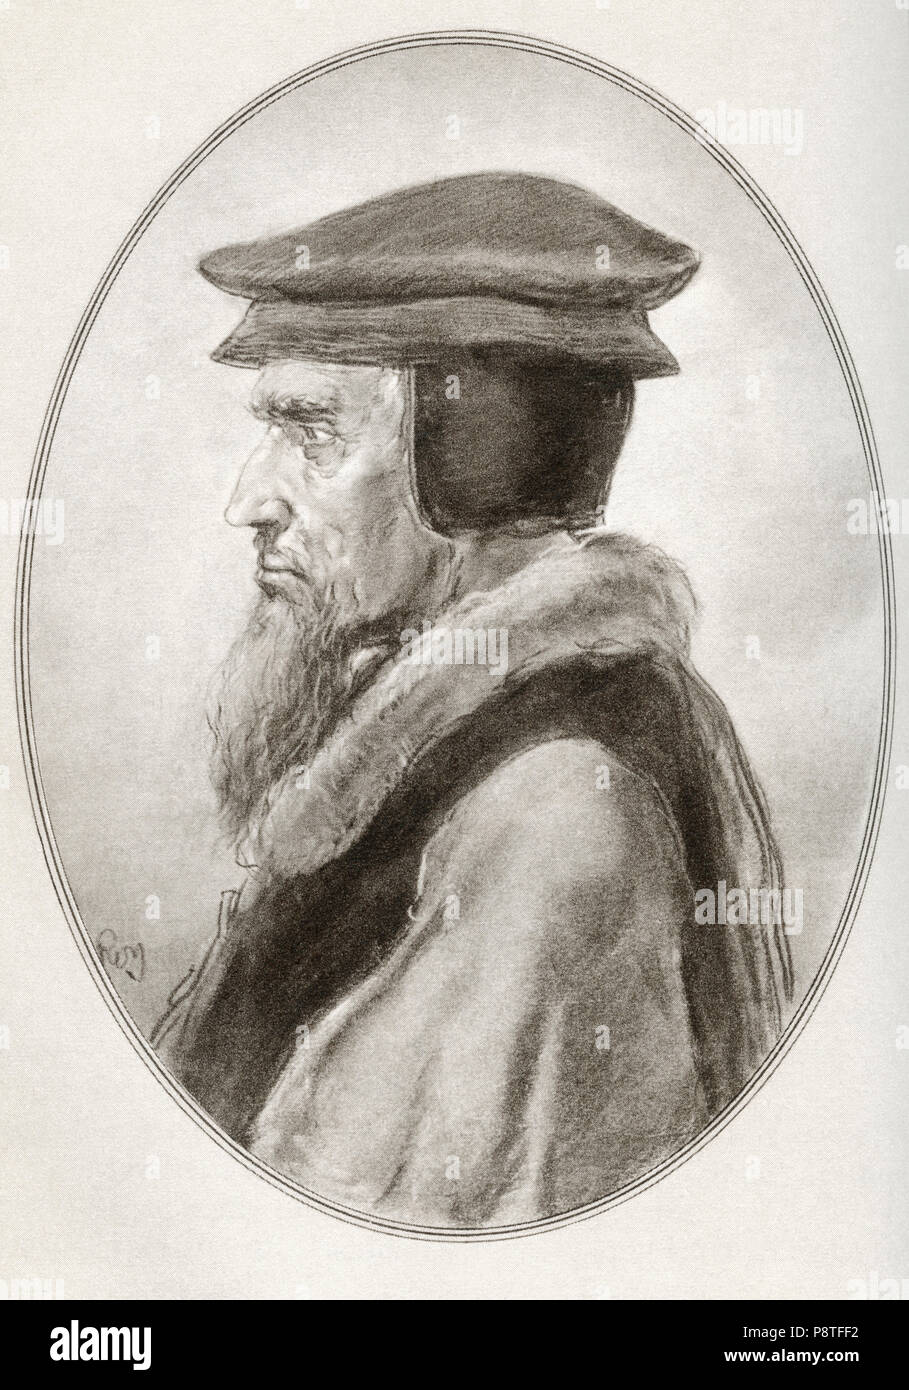 John Calvin, born Jehan Cauvin, 1509 – 1564.  French theologian, pastor and reformer in Geneva during the Protestant Reformation.  Illustration by Gordon Ross, American artist and illustrator (1873-1946), from Living Biographies of Religious Leaders. Stock Photo